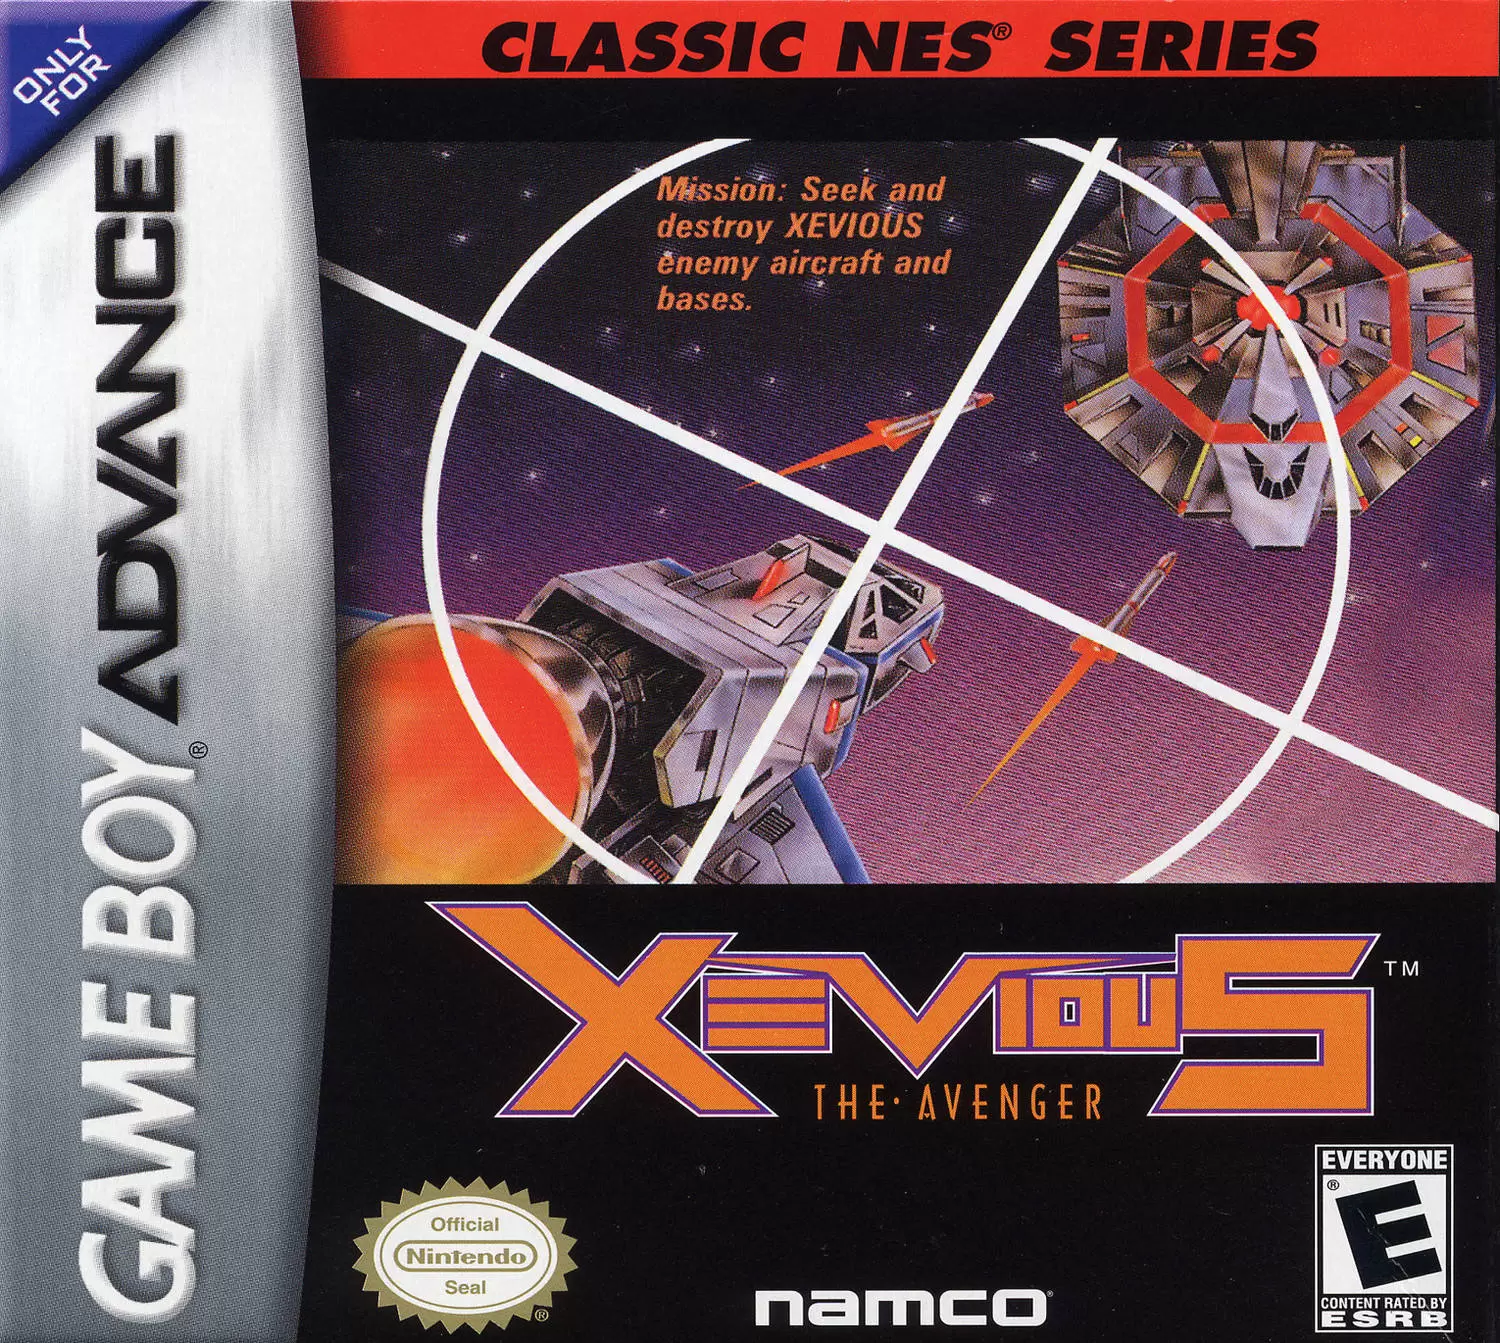 Game Boy Advance Games - Classic NES Series: Xevious